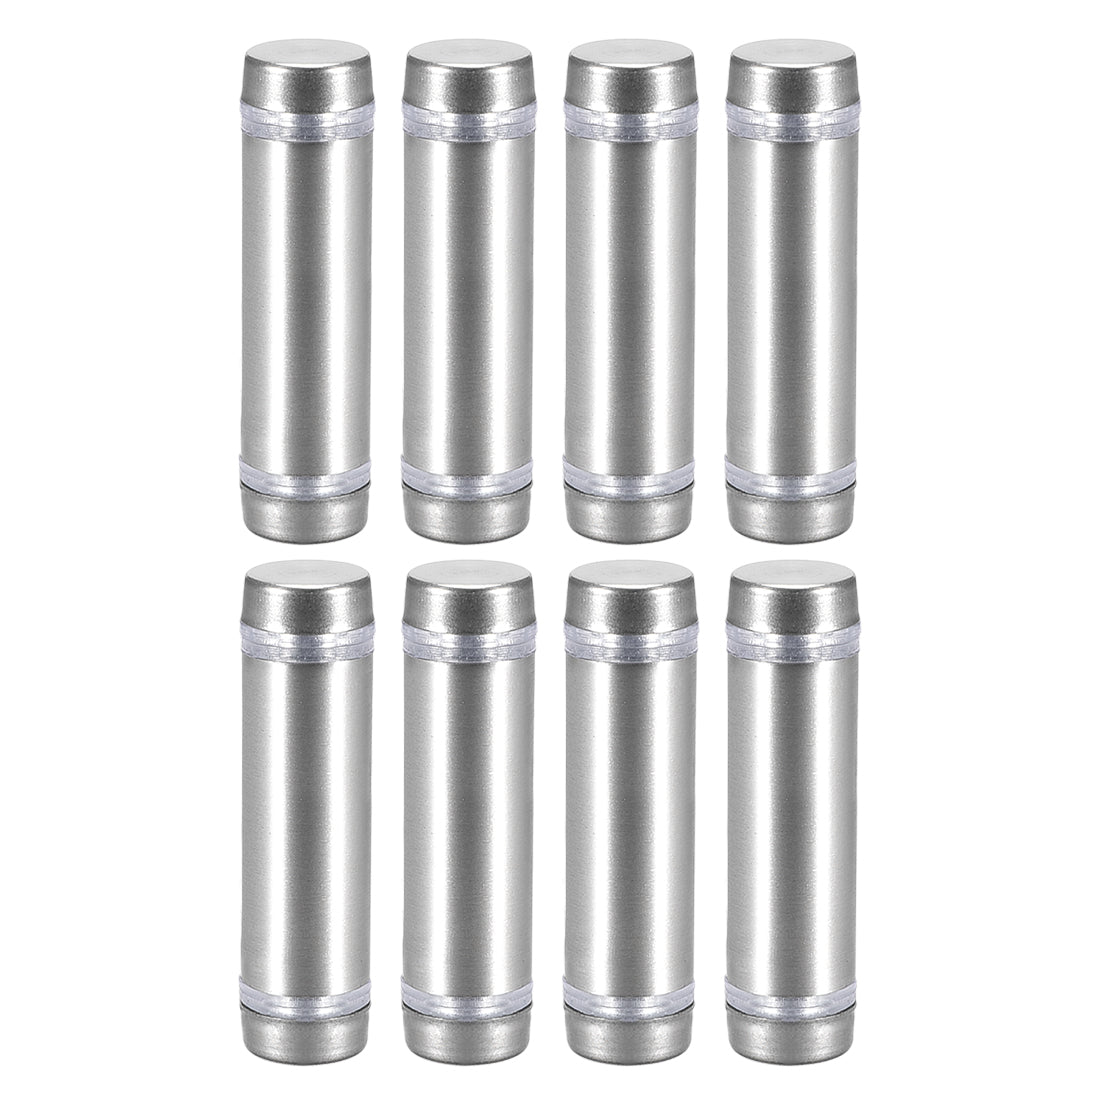 uxcell Uxcell Glass Standoff Double Head Stainless Steel Standoff Holder 12mm x 44mm 8 Pcs